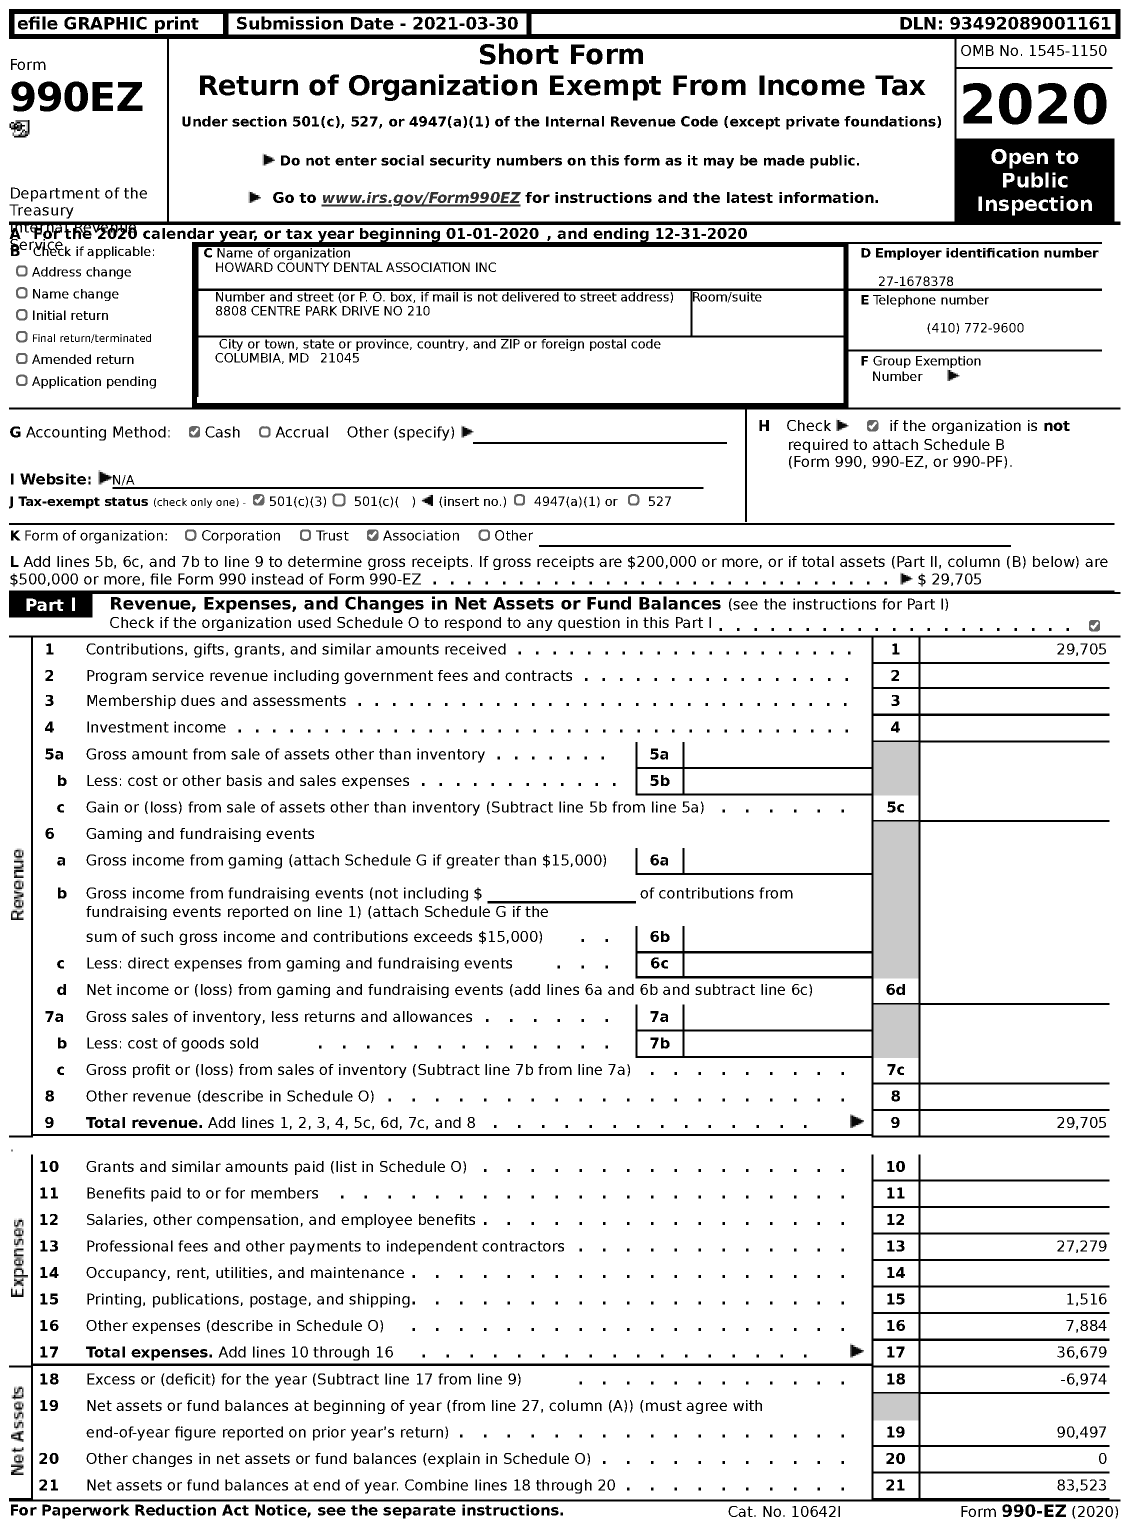 Image of first page of 2020 Form 990EZ for Howard County Dental Association